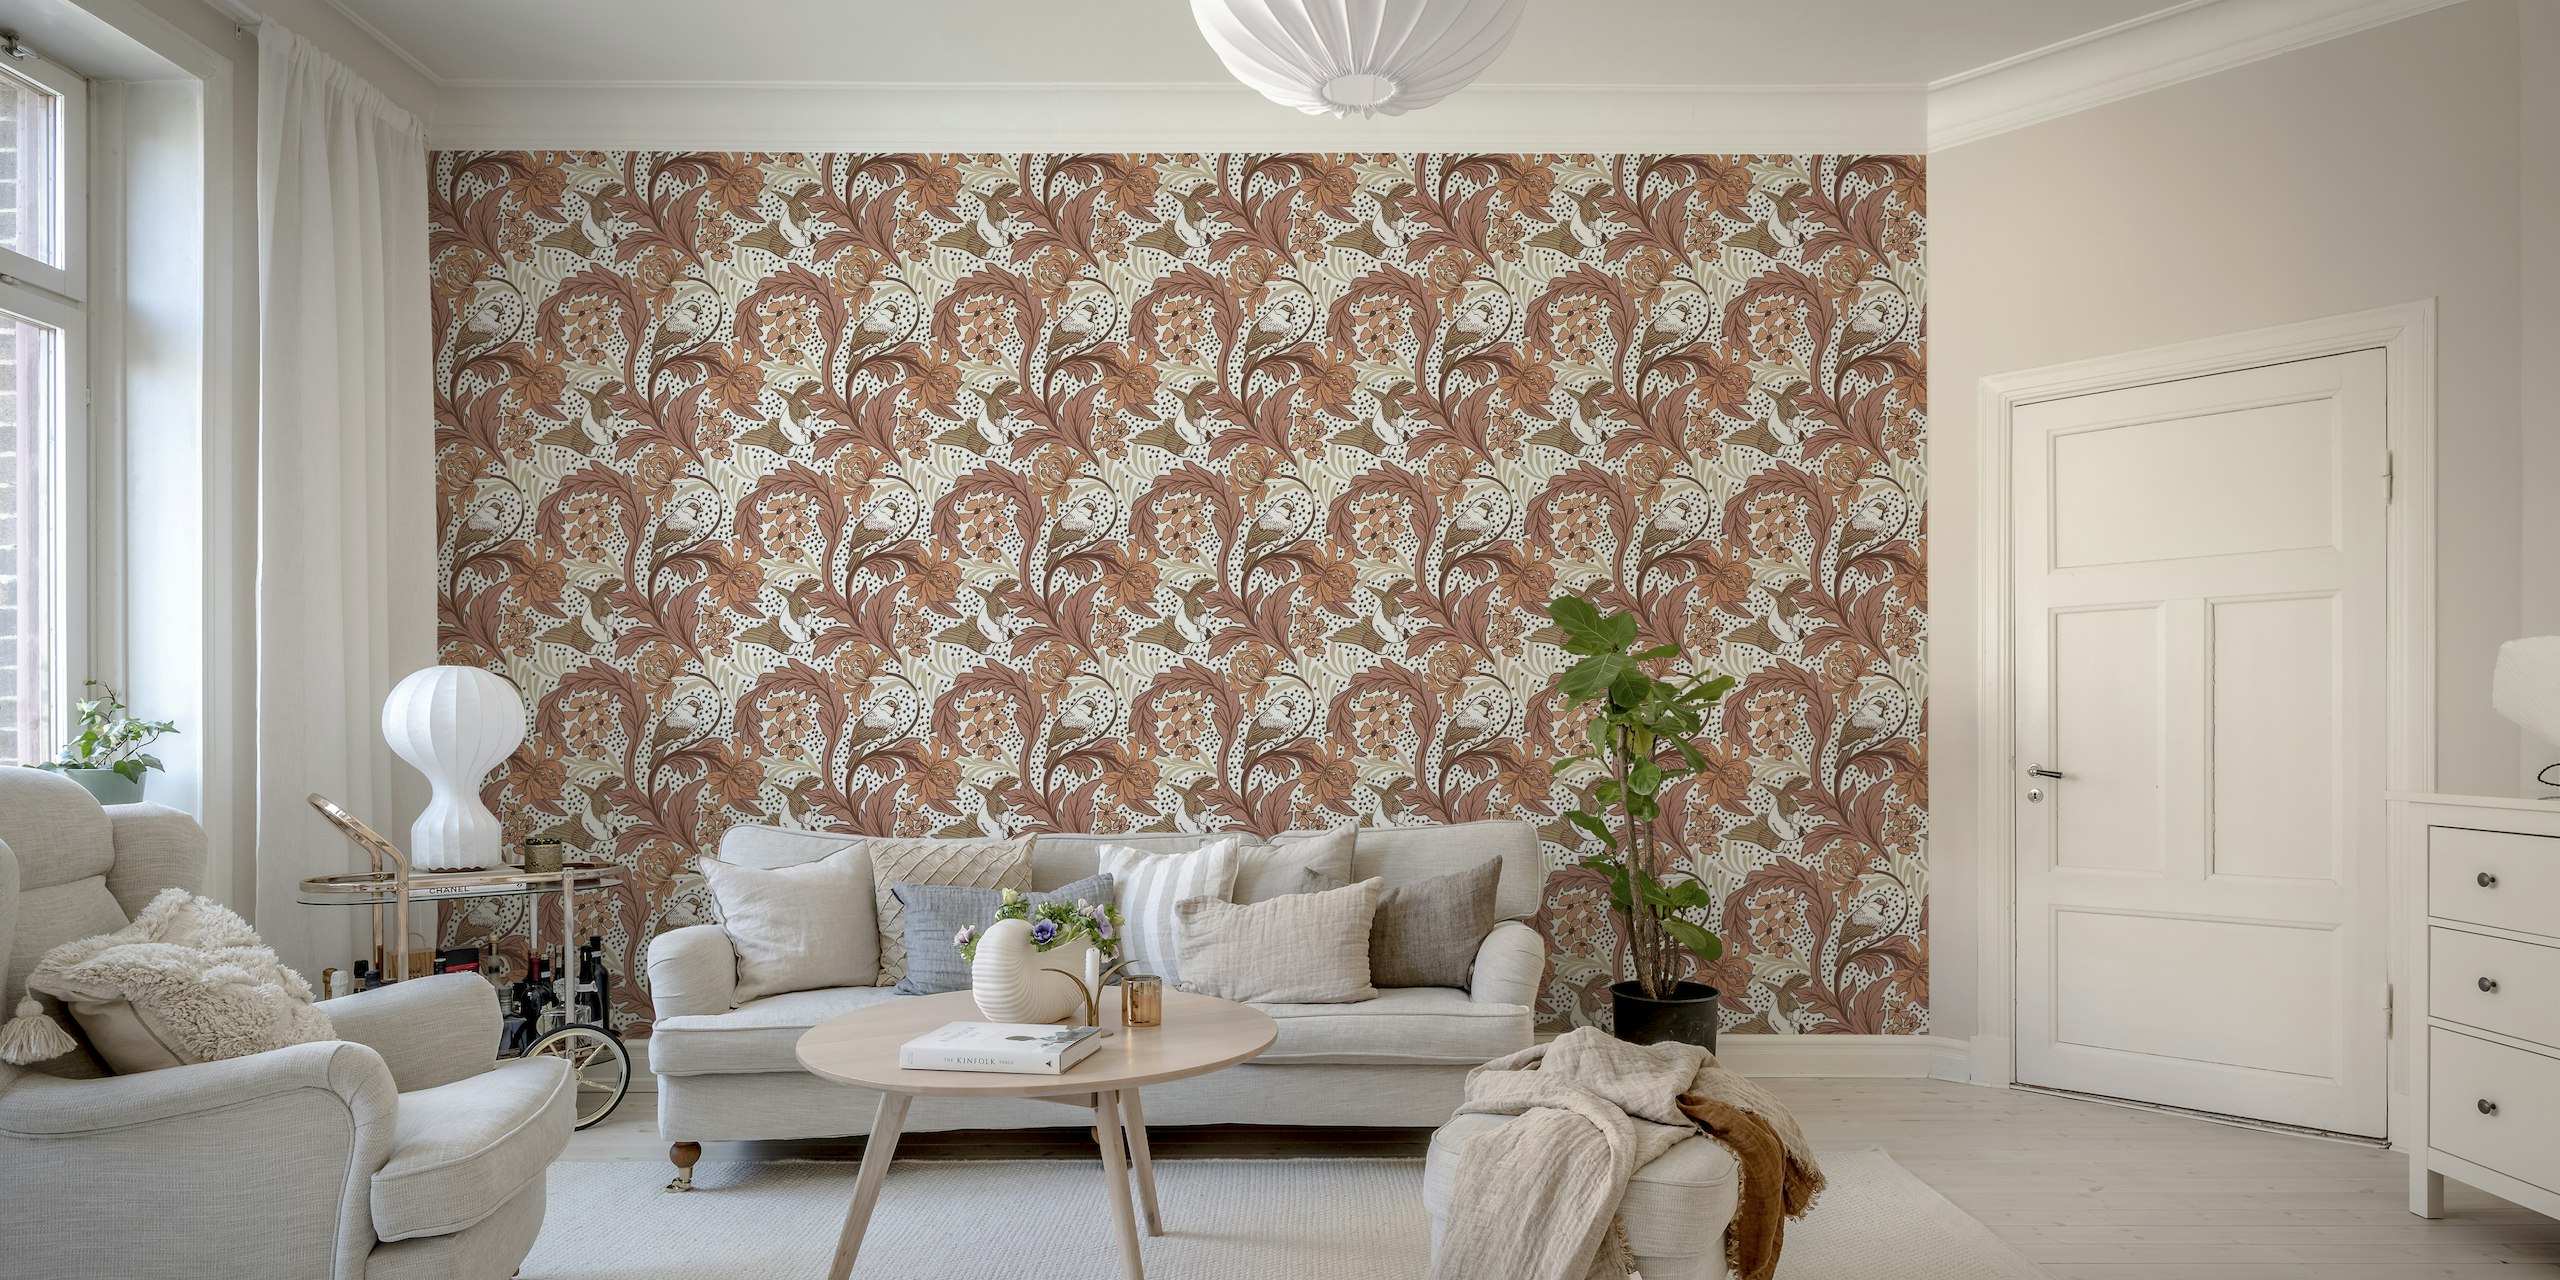 Linnut wall mural with birds, flowers, and foliage in earthy tones